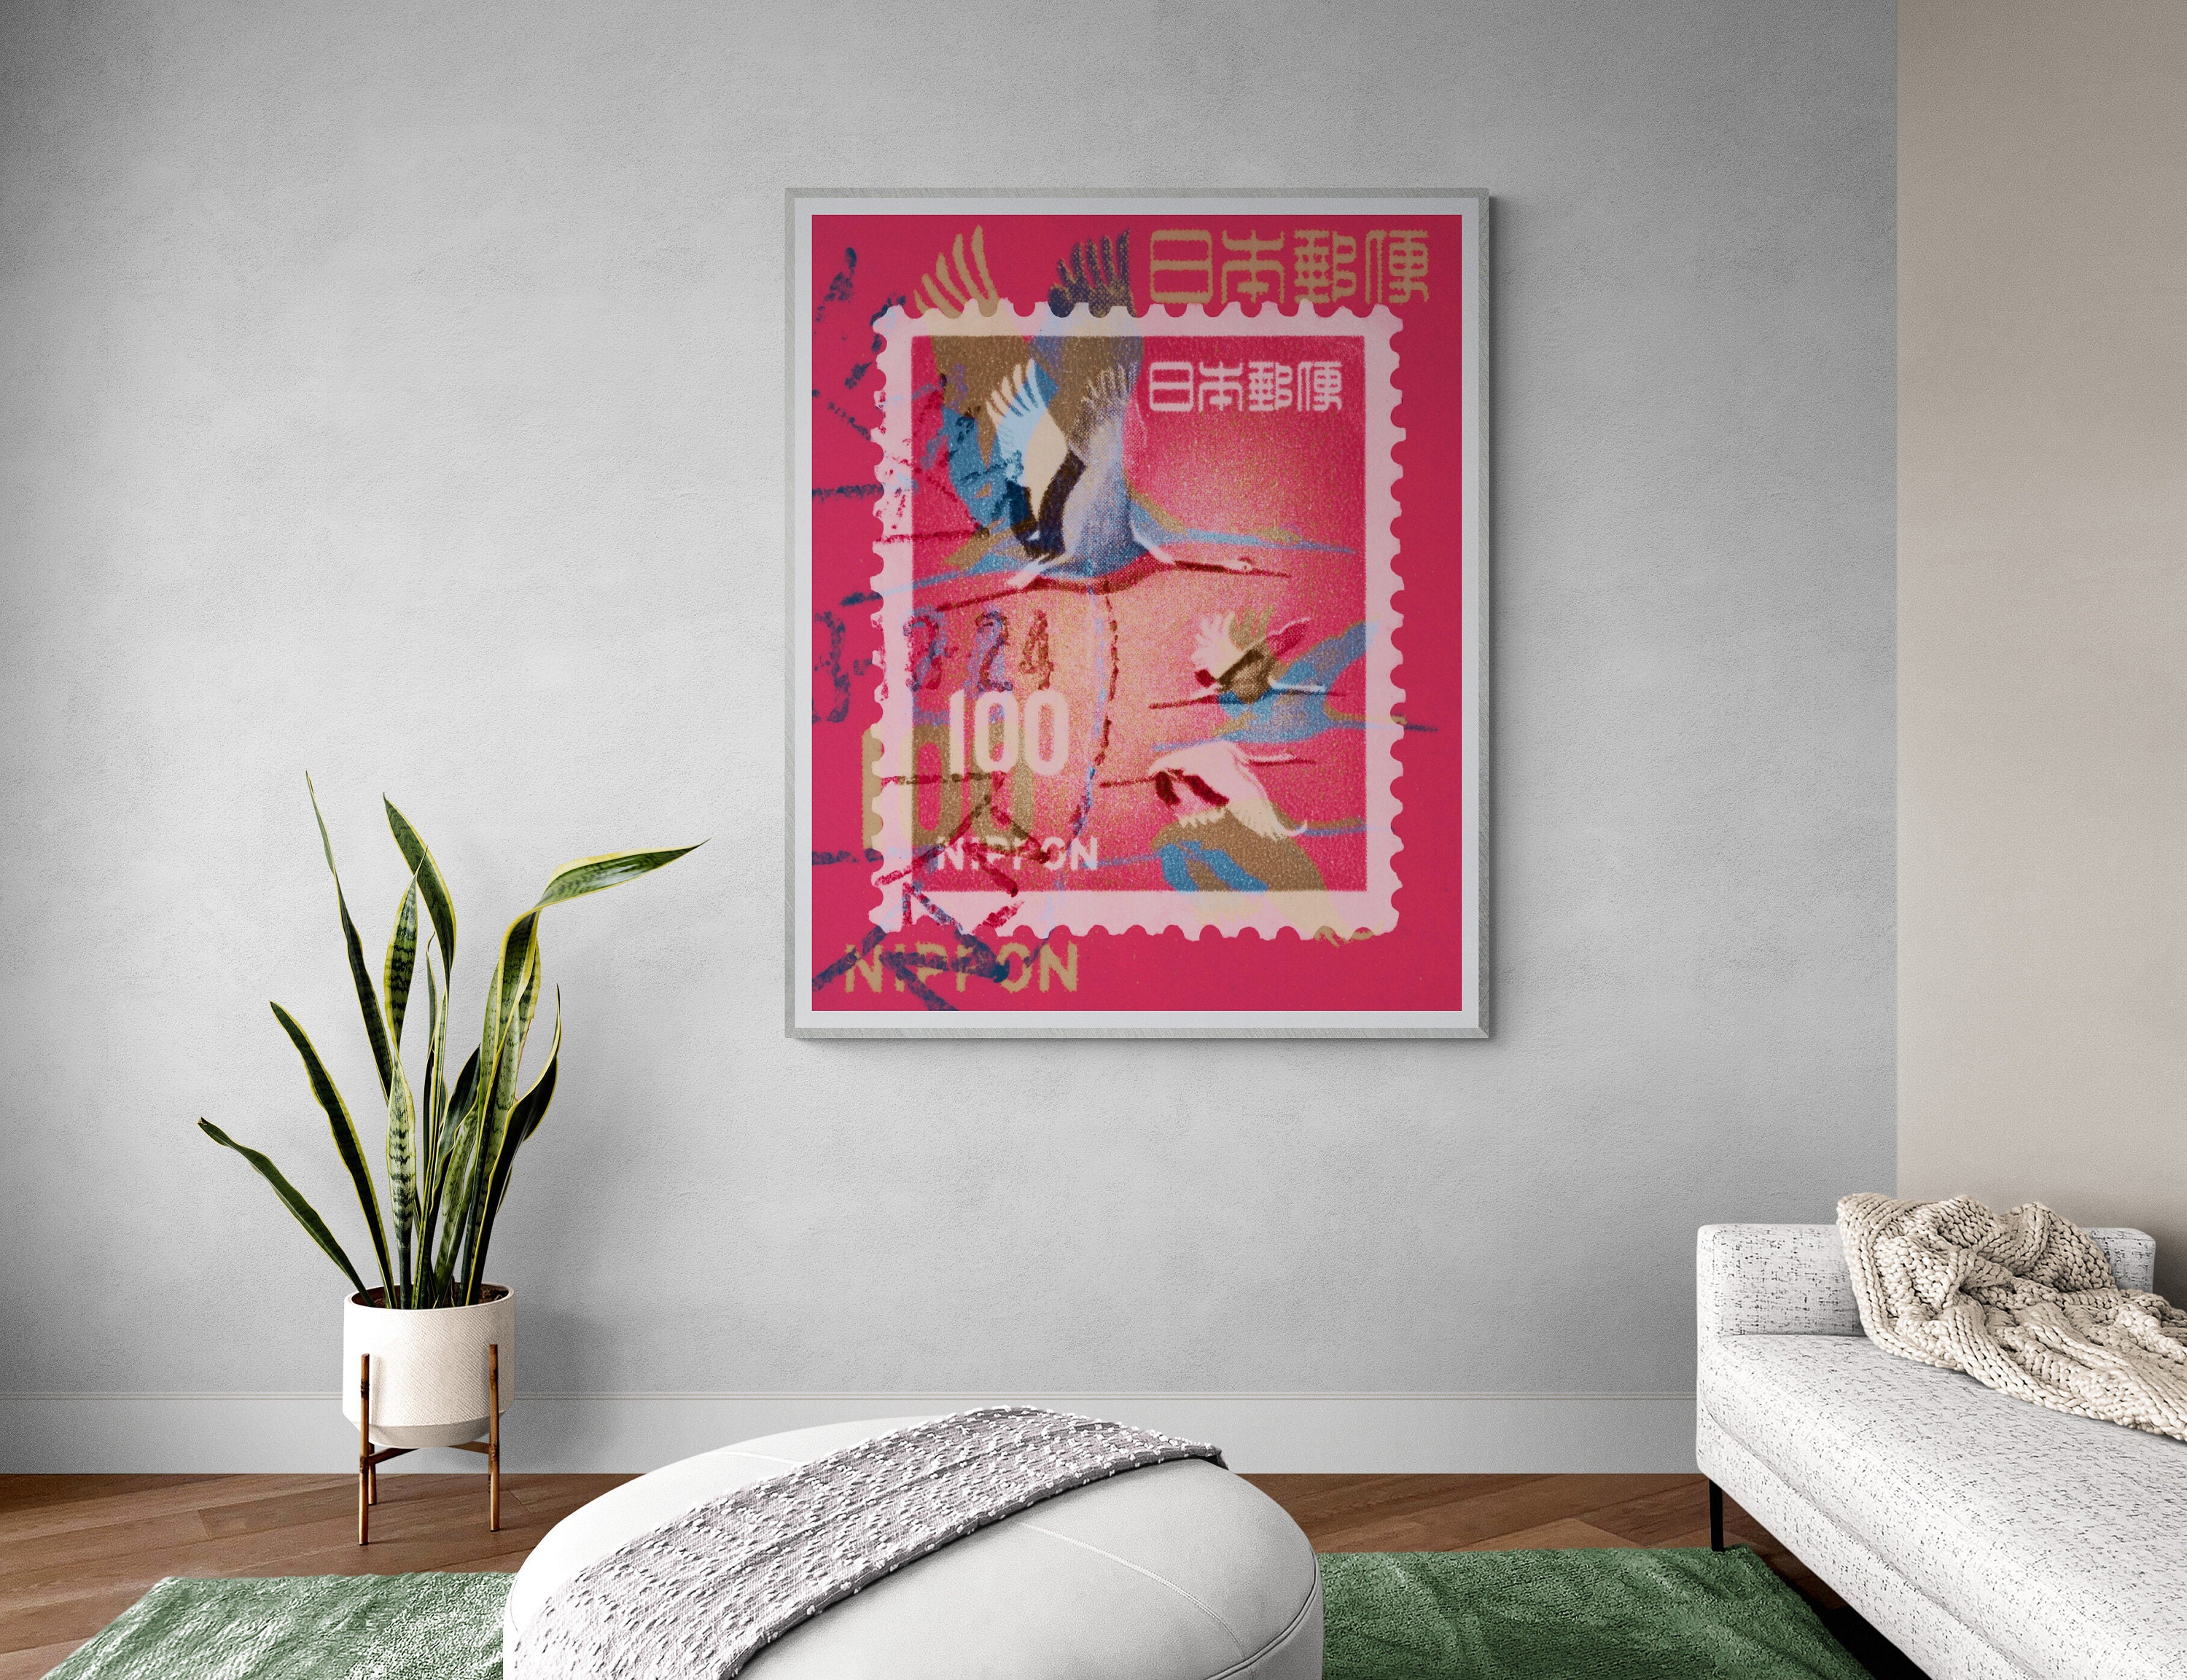 Japanese Crane contemporary art print - Nippon Fine Art Print by deborah pendell created from a vintage postage stamp